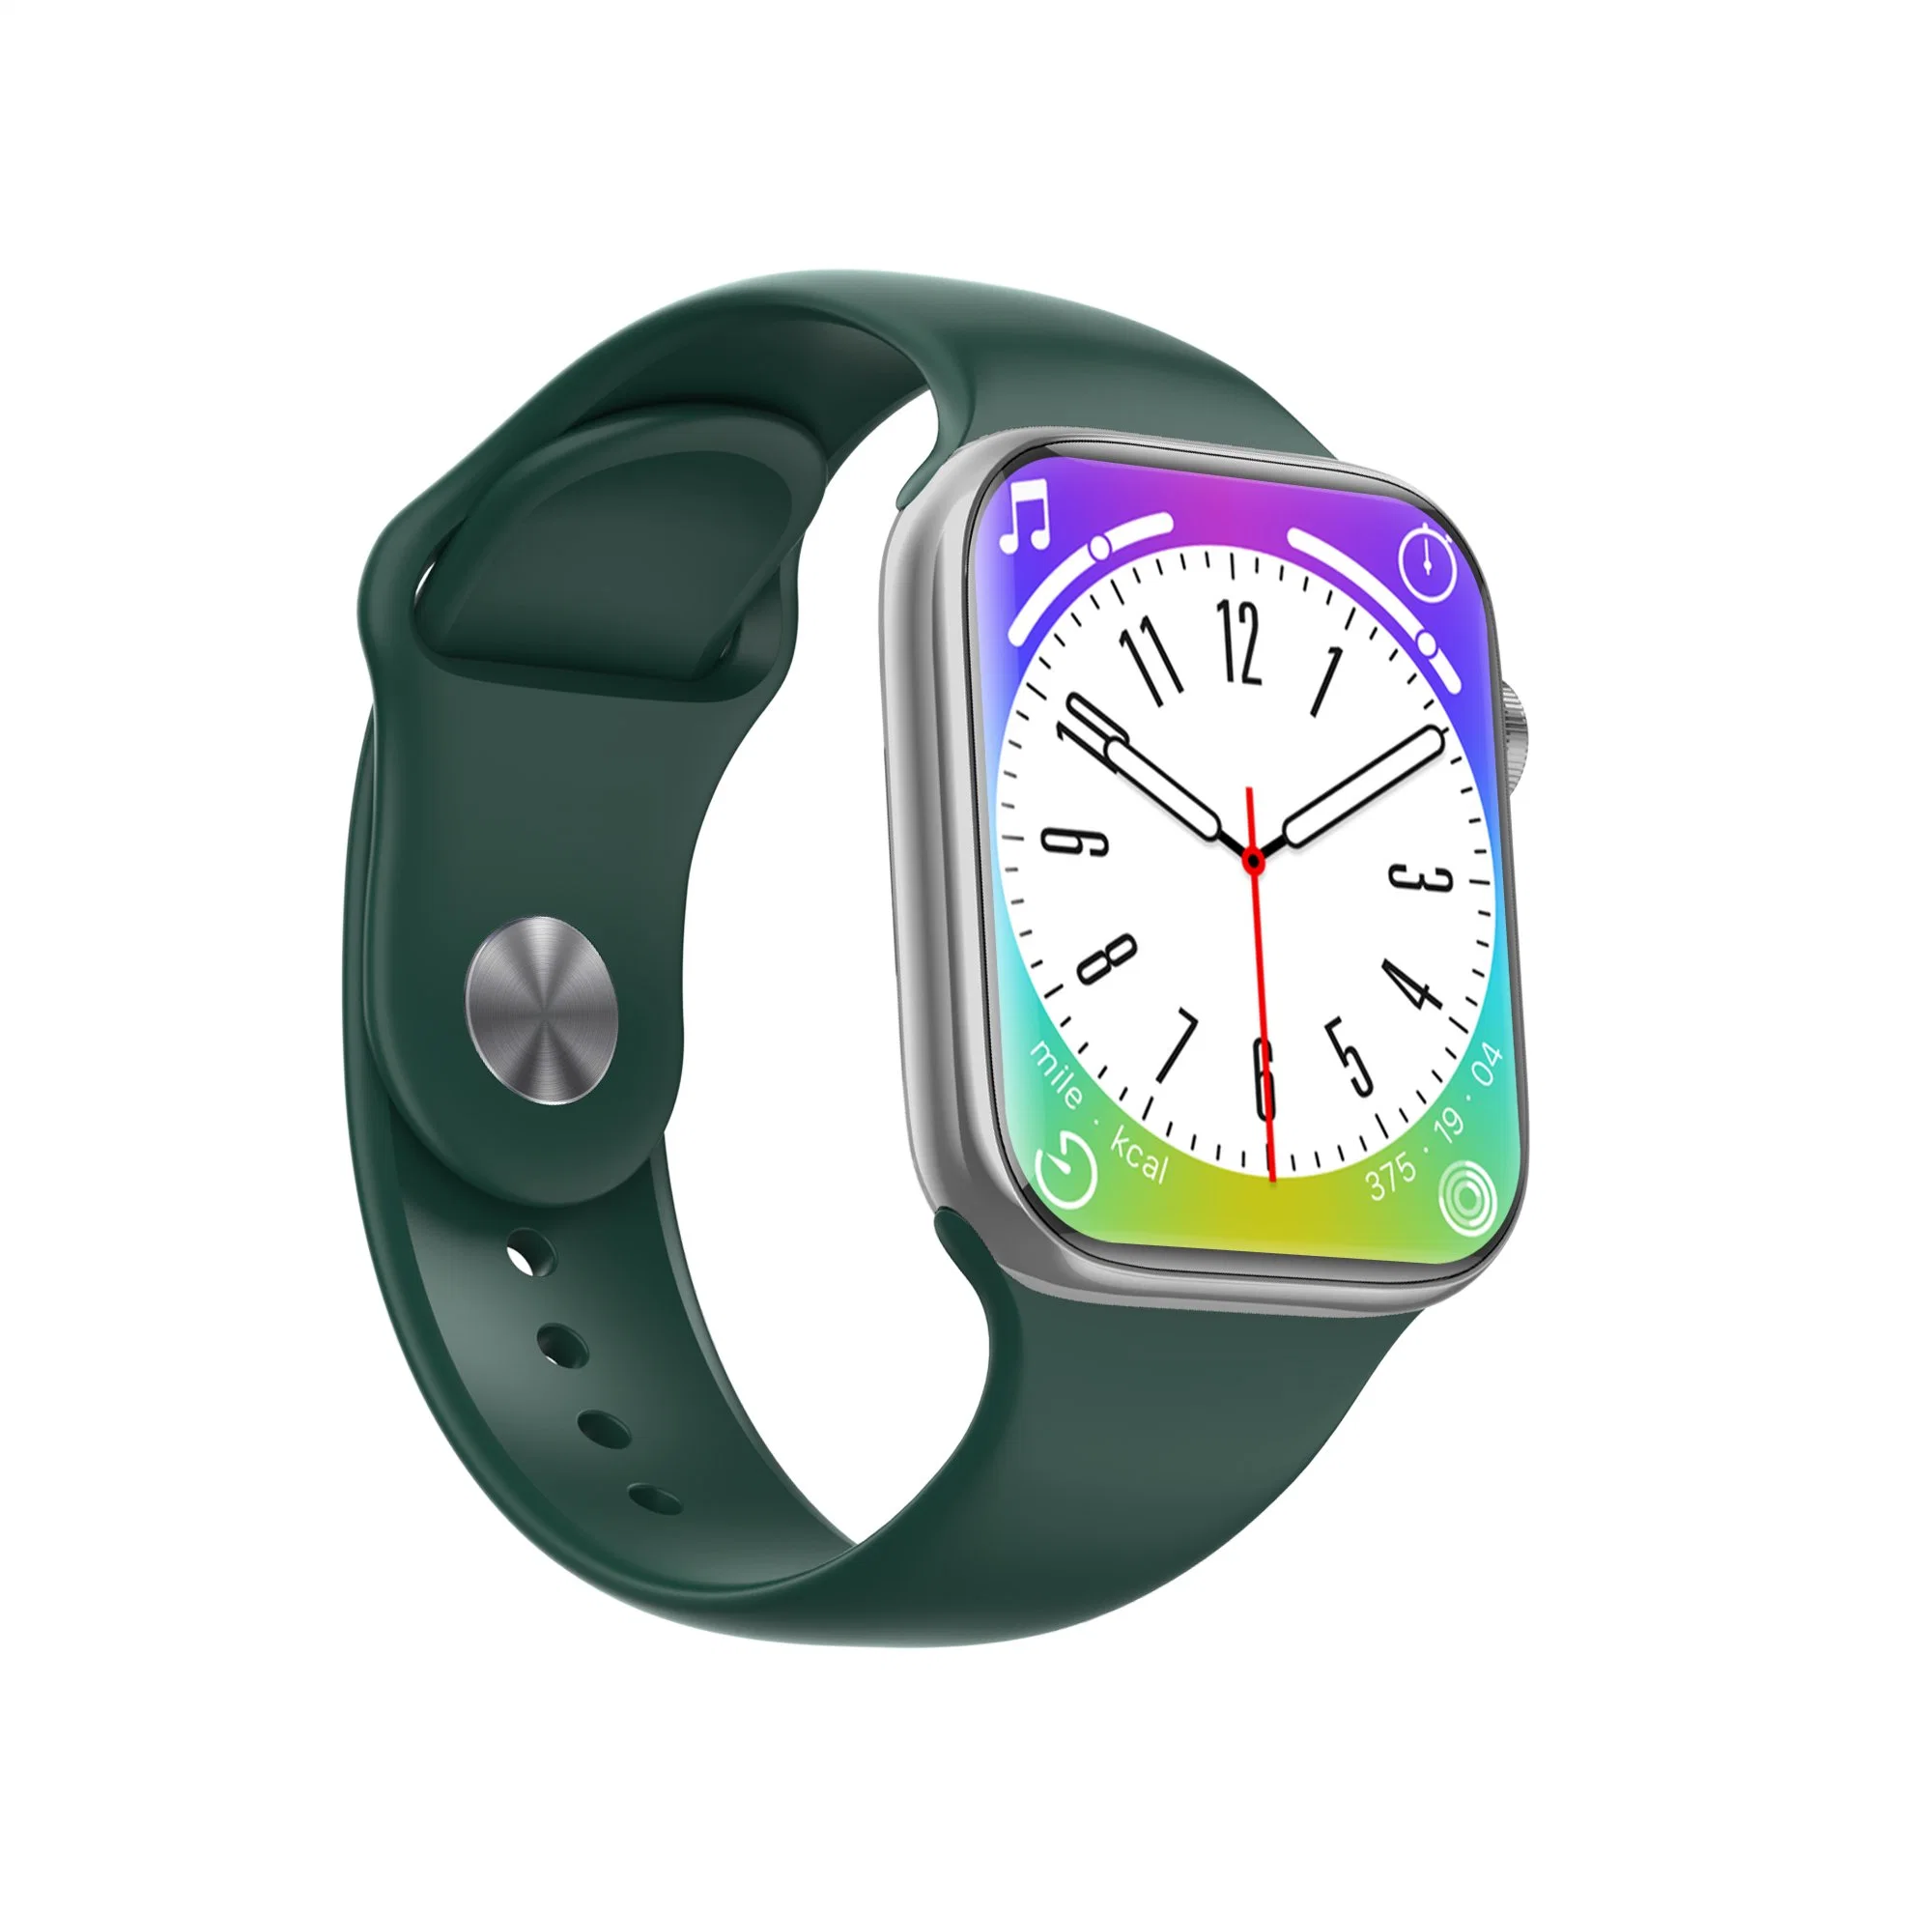 Chinese Customizable Fashion Band Smart Watch with Bluetooth Function